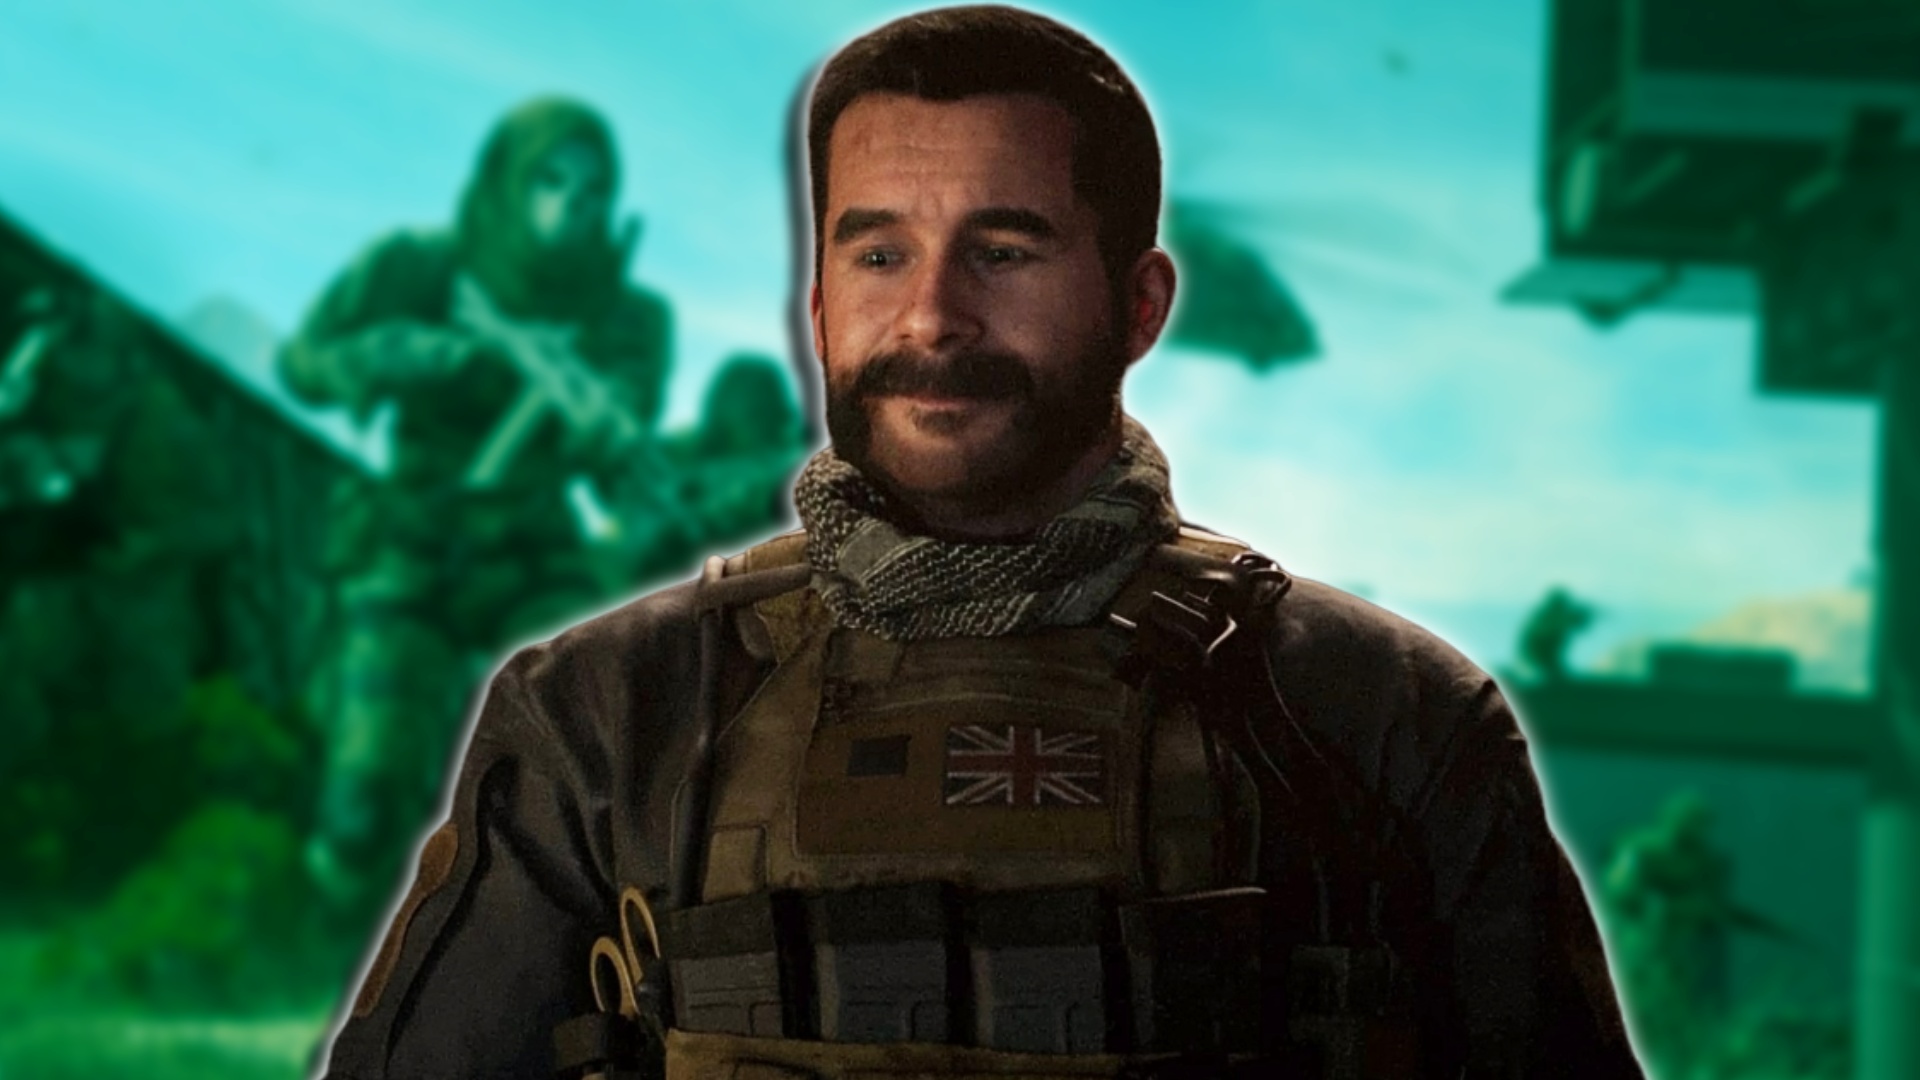 Call of Duty: Modern Warfare 2 voice actors for all characters